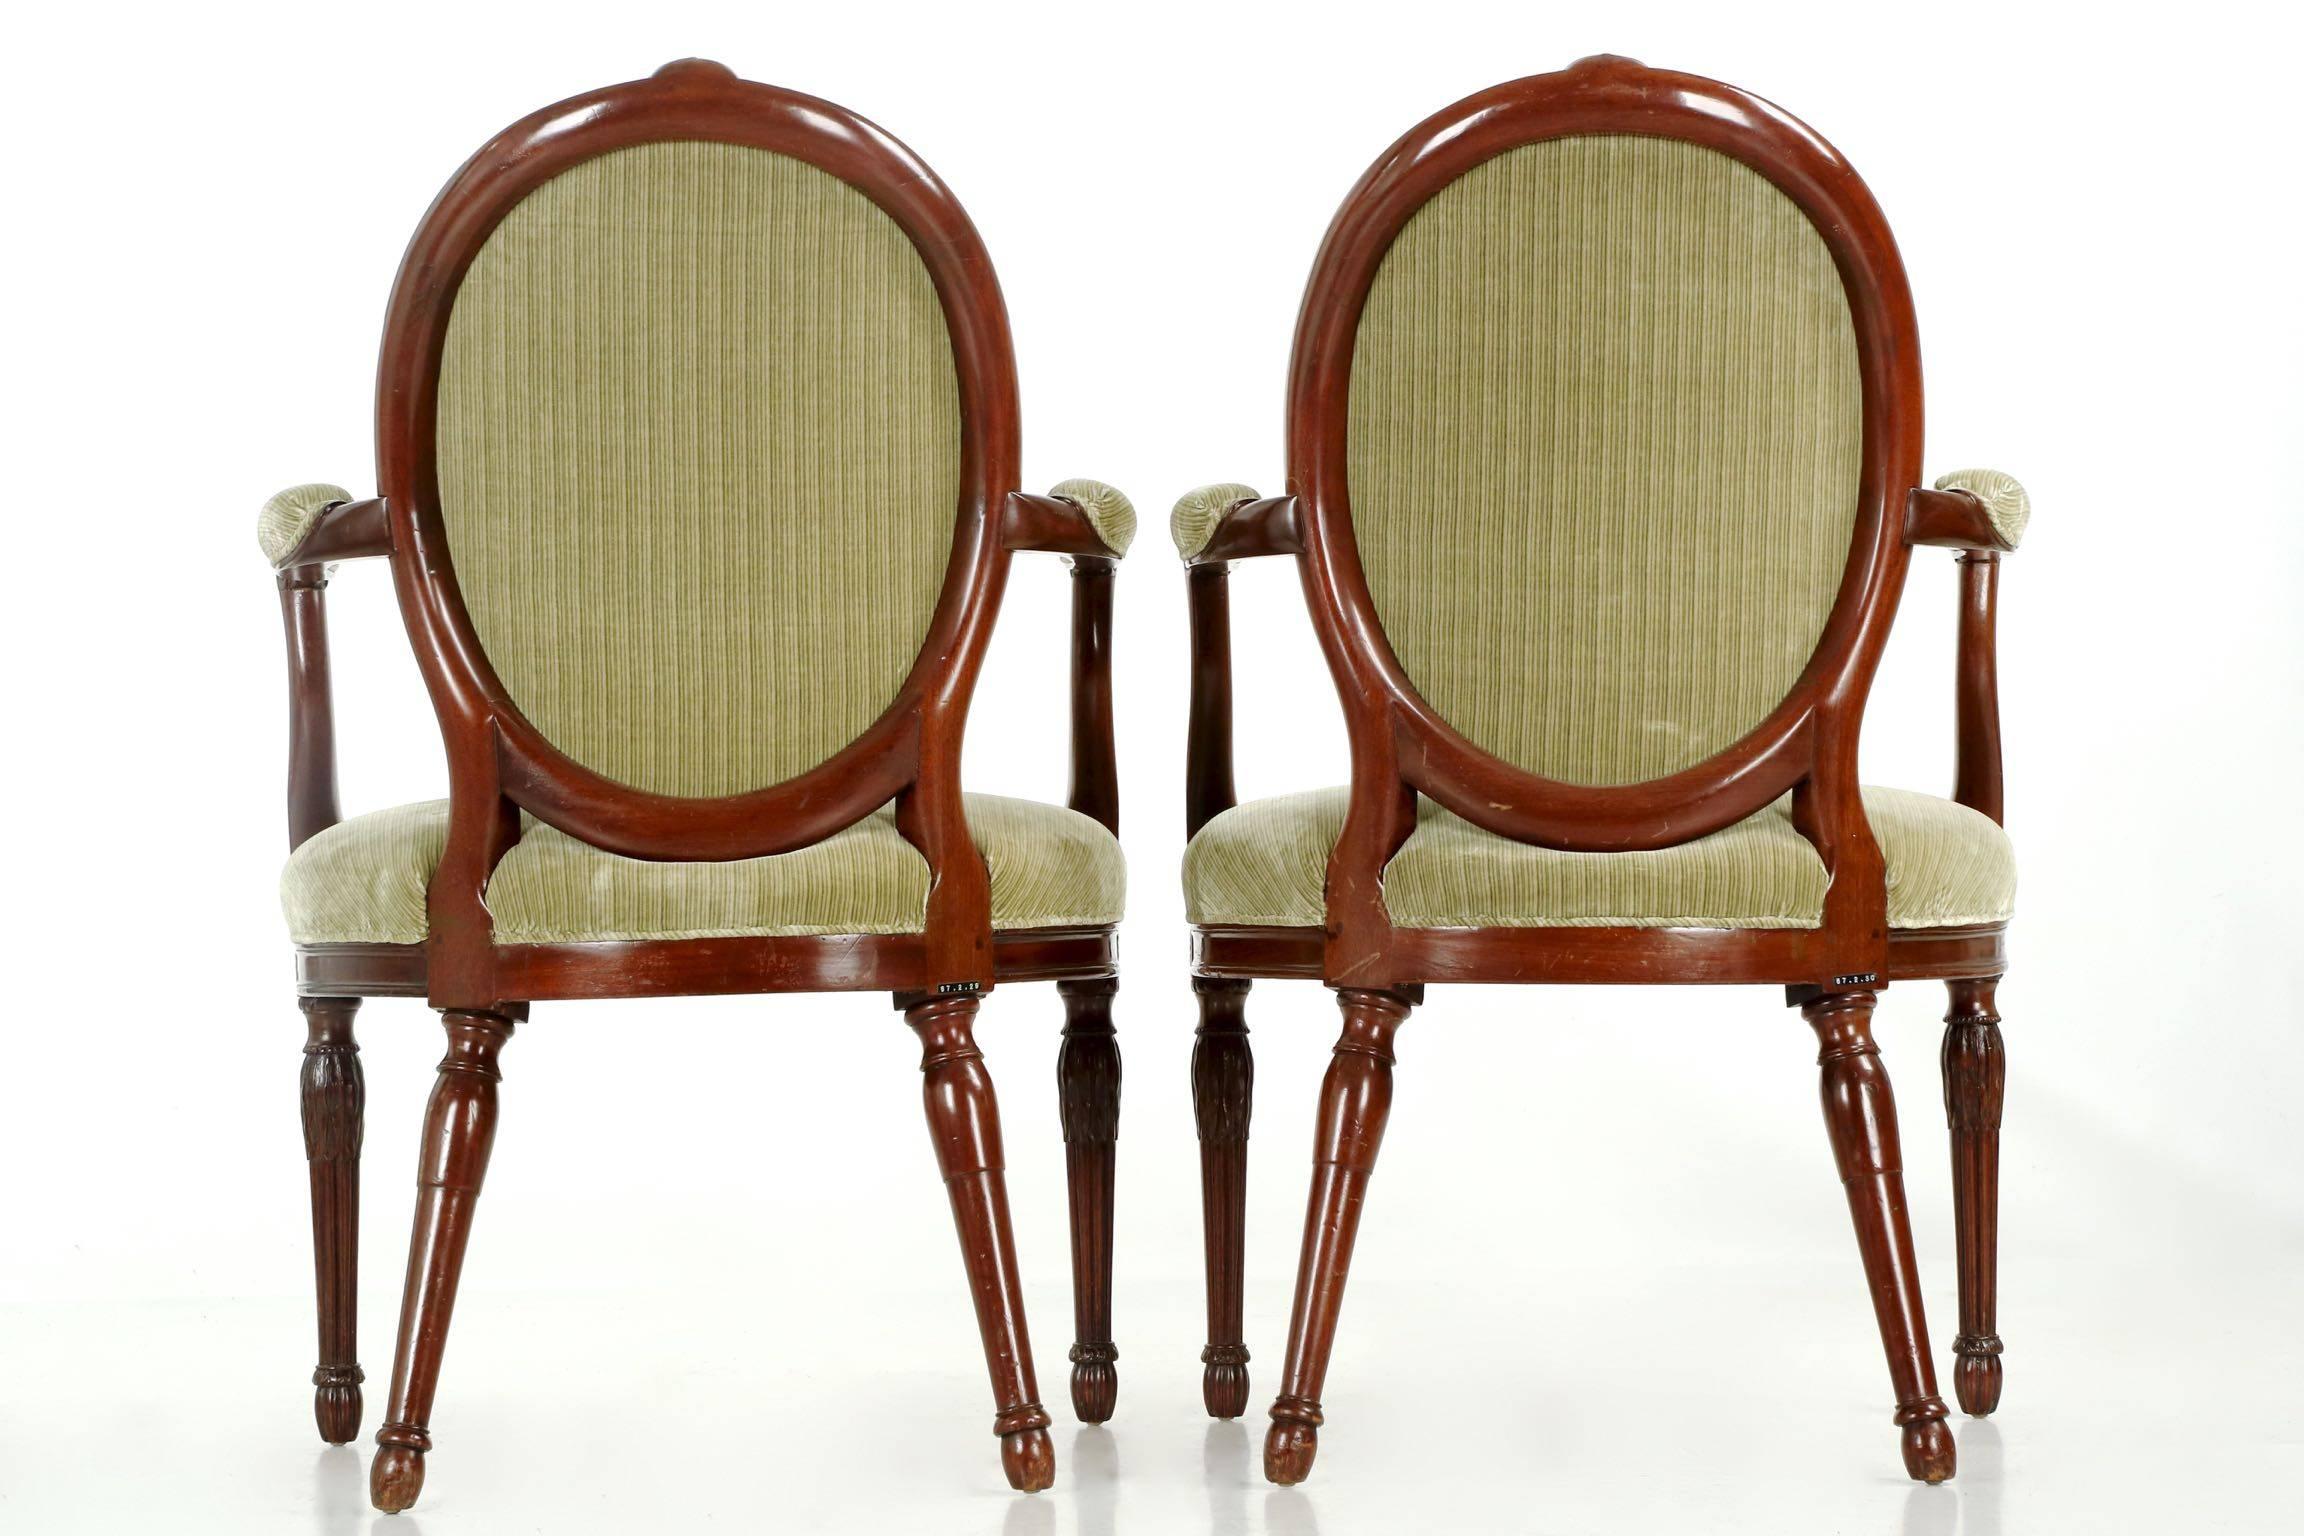 English Fine Pair of George III Carved Mahogany Armchairs, Late 18th Century